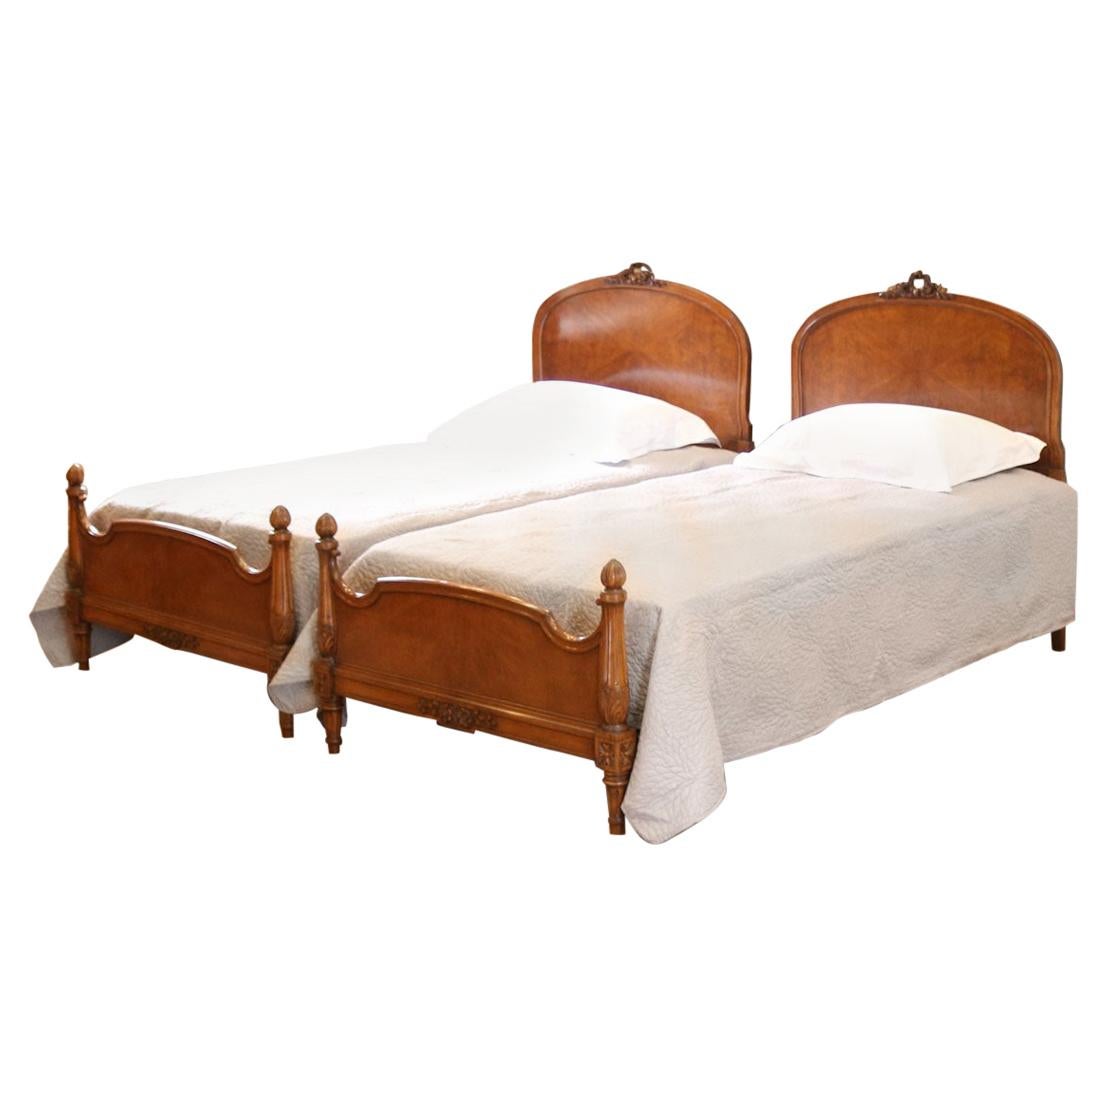 Matching Pair of Walnut Beds, WP22